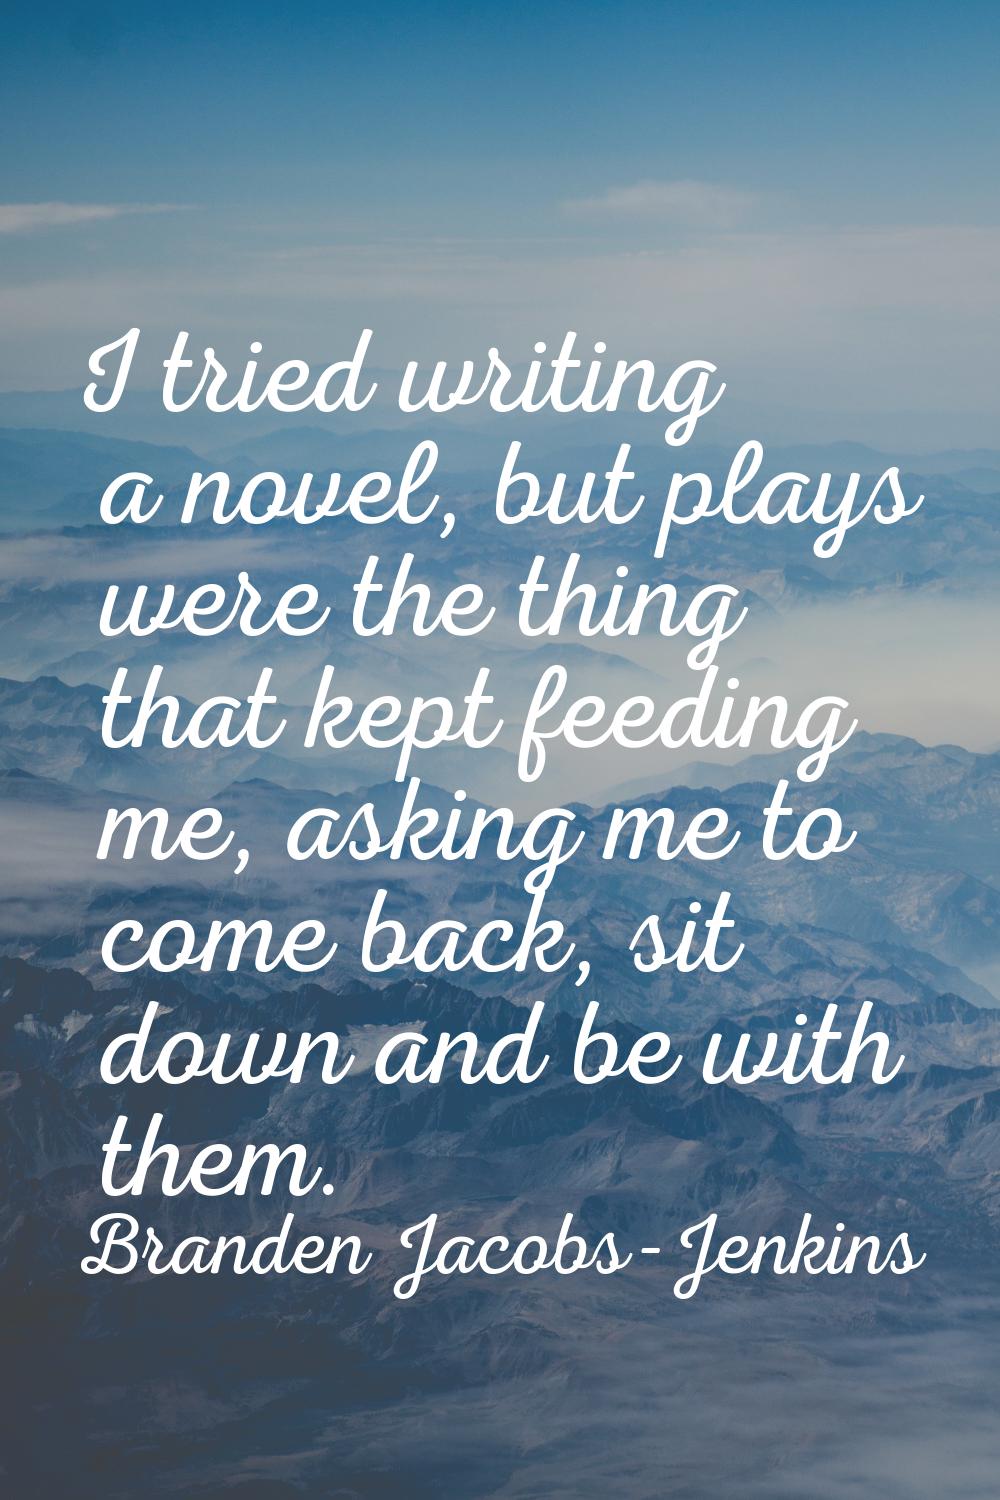 I tried writing a novel, but plays were the thing that kept feeding me, asking me to come back, sit